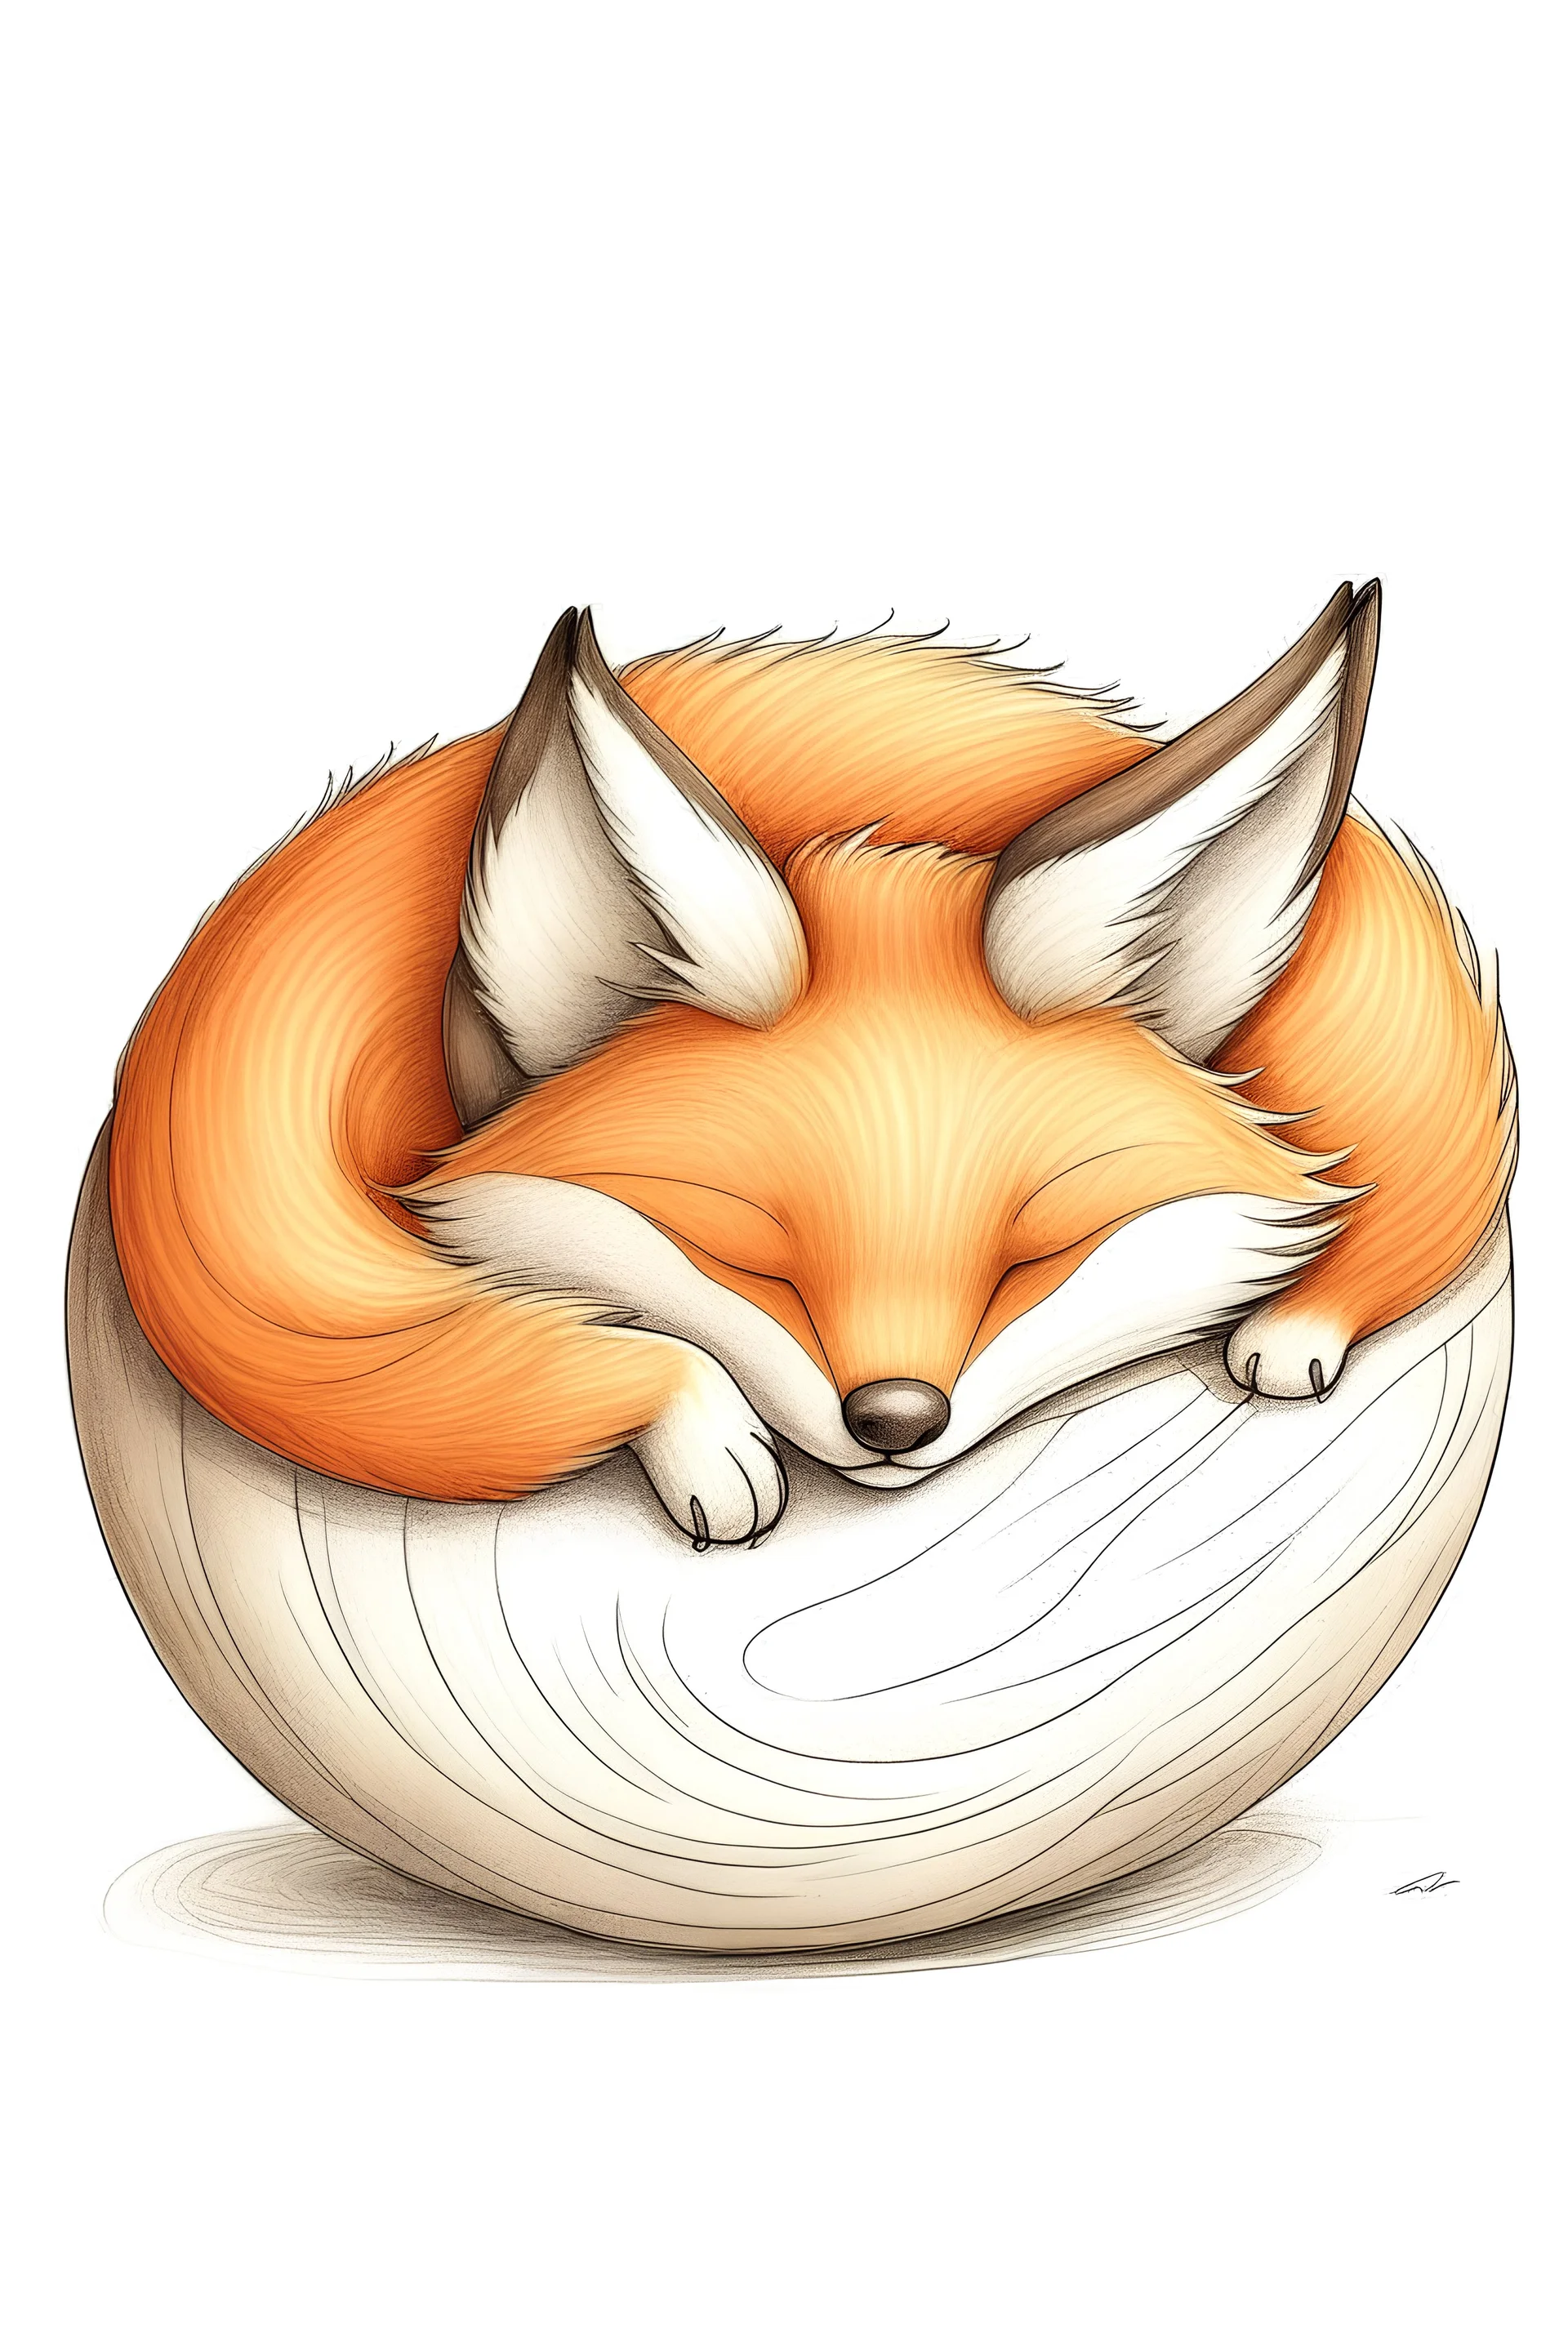 an adorable slightly cartoony fox curled in a ball in soft pencil crayon on a white background.